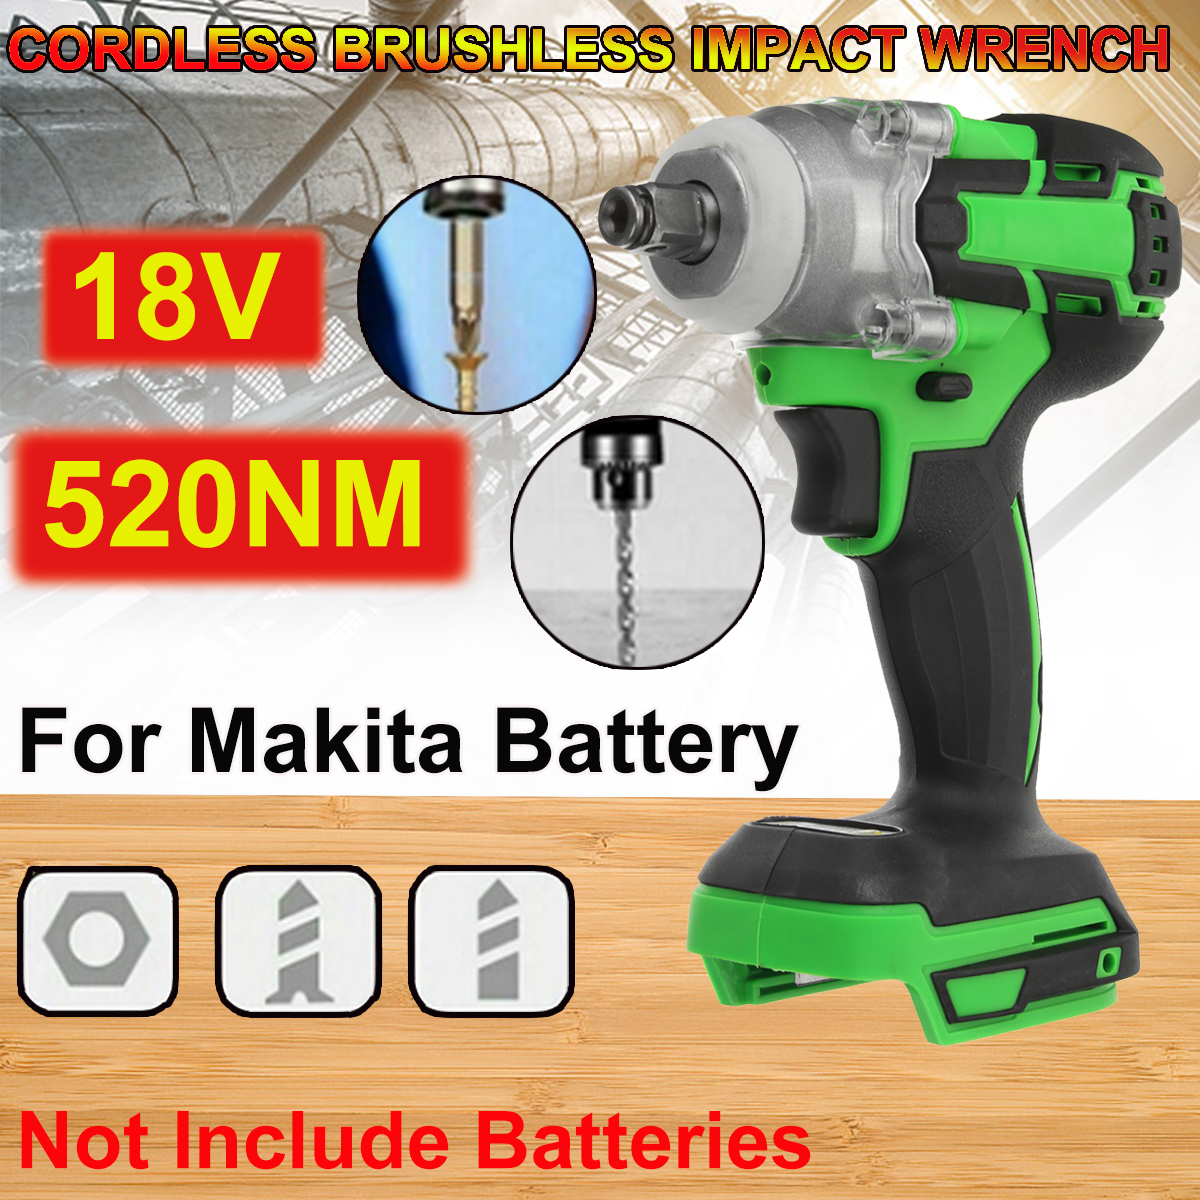 520NM-Torque-Brushless-Impact-Wrench-Screwdriver-Cordless-Rechargable-Electric-Wrench-Driver-Tool-St-1610036-1